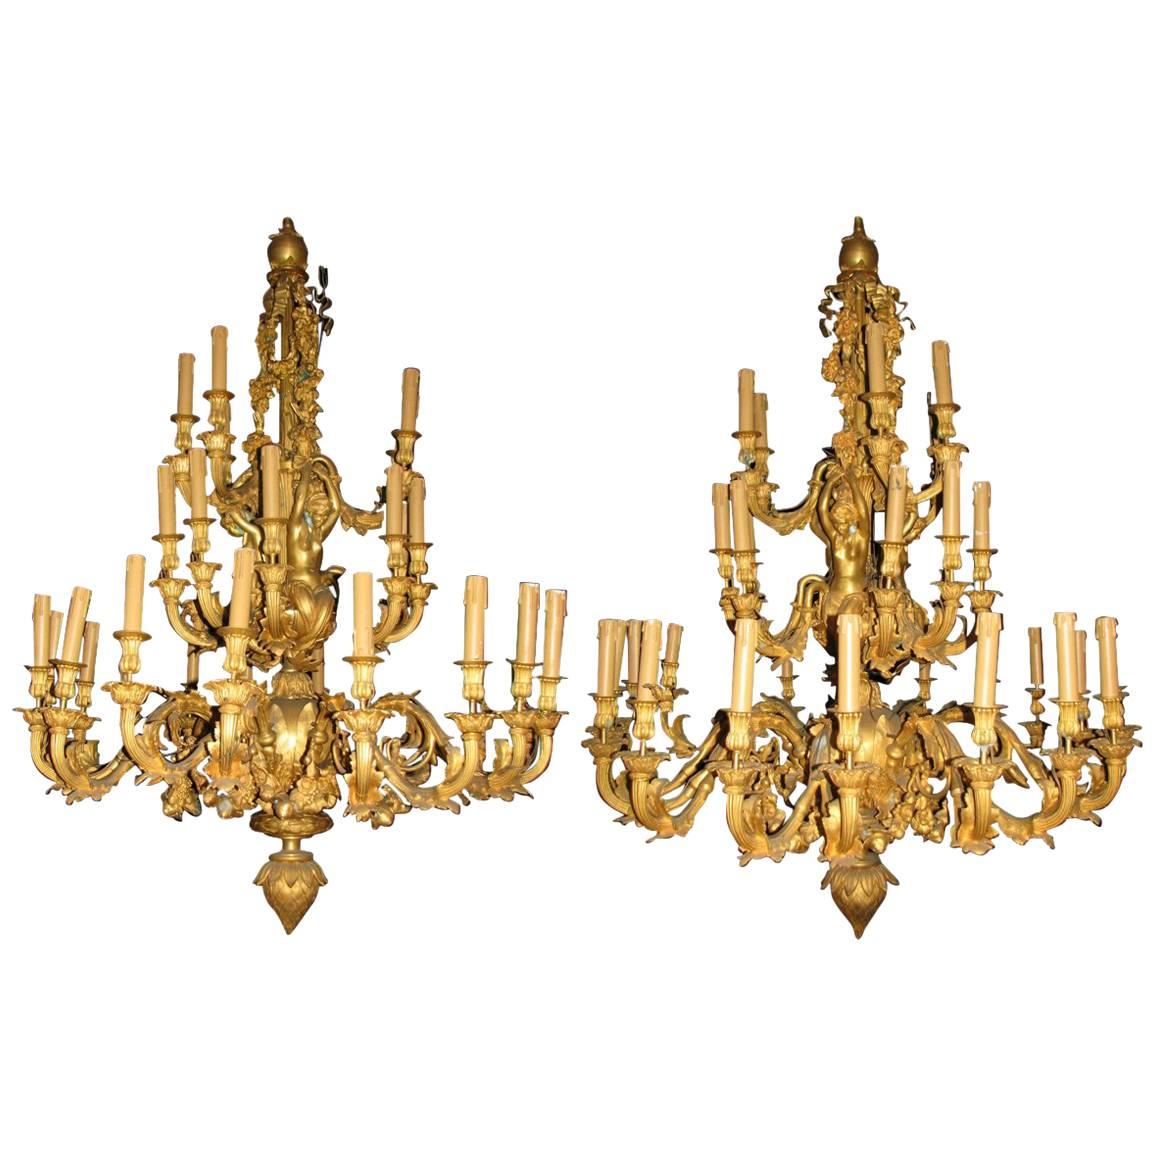 Pair of Louis XV Style Thirty-Three-Light Ormolu Figural Chandeliers For Sale